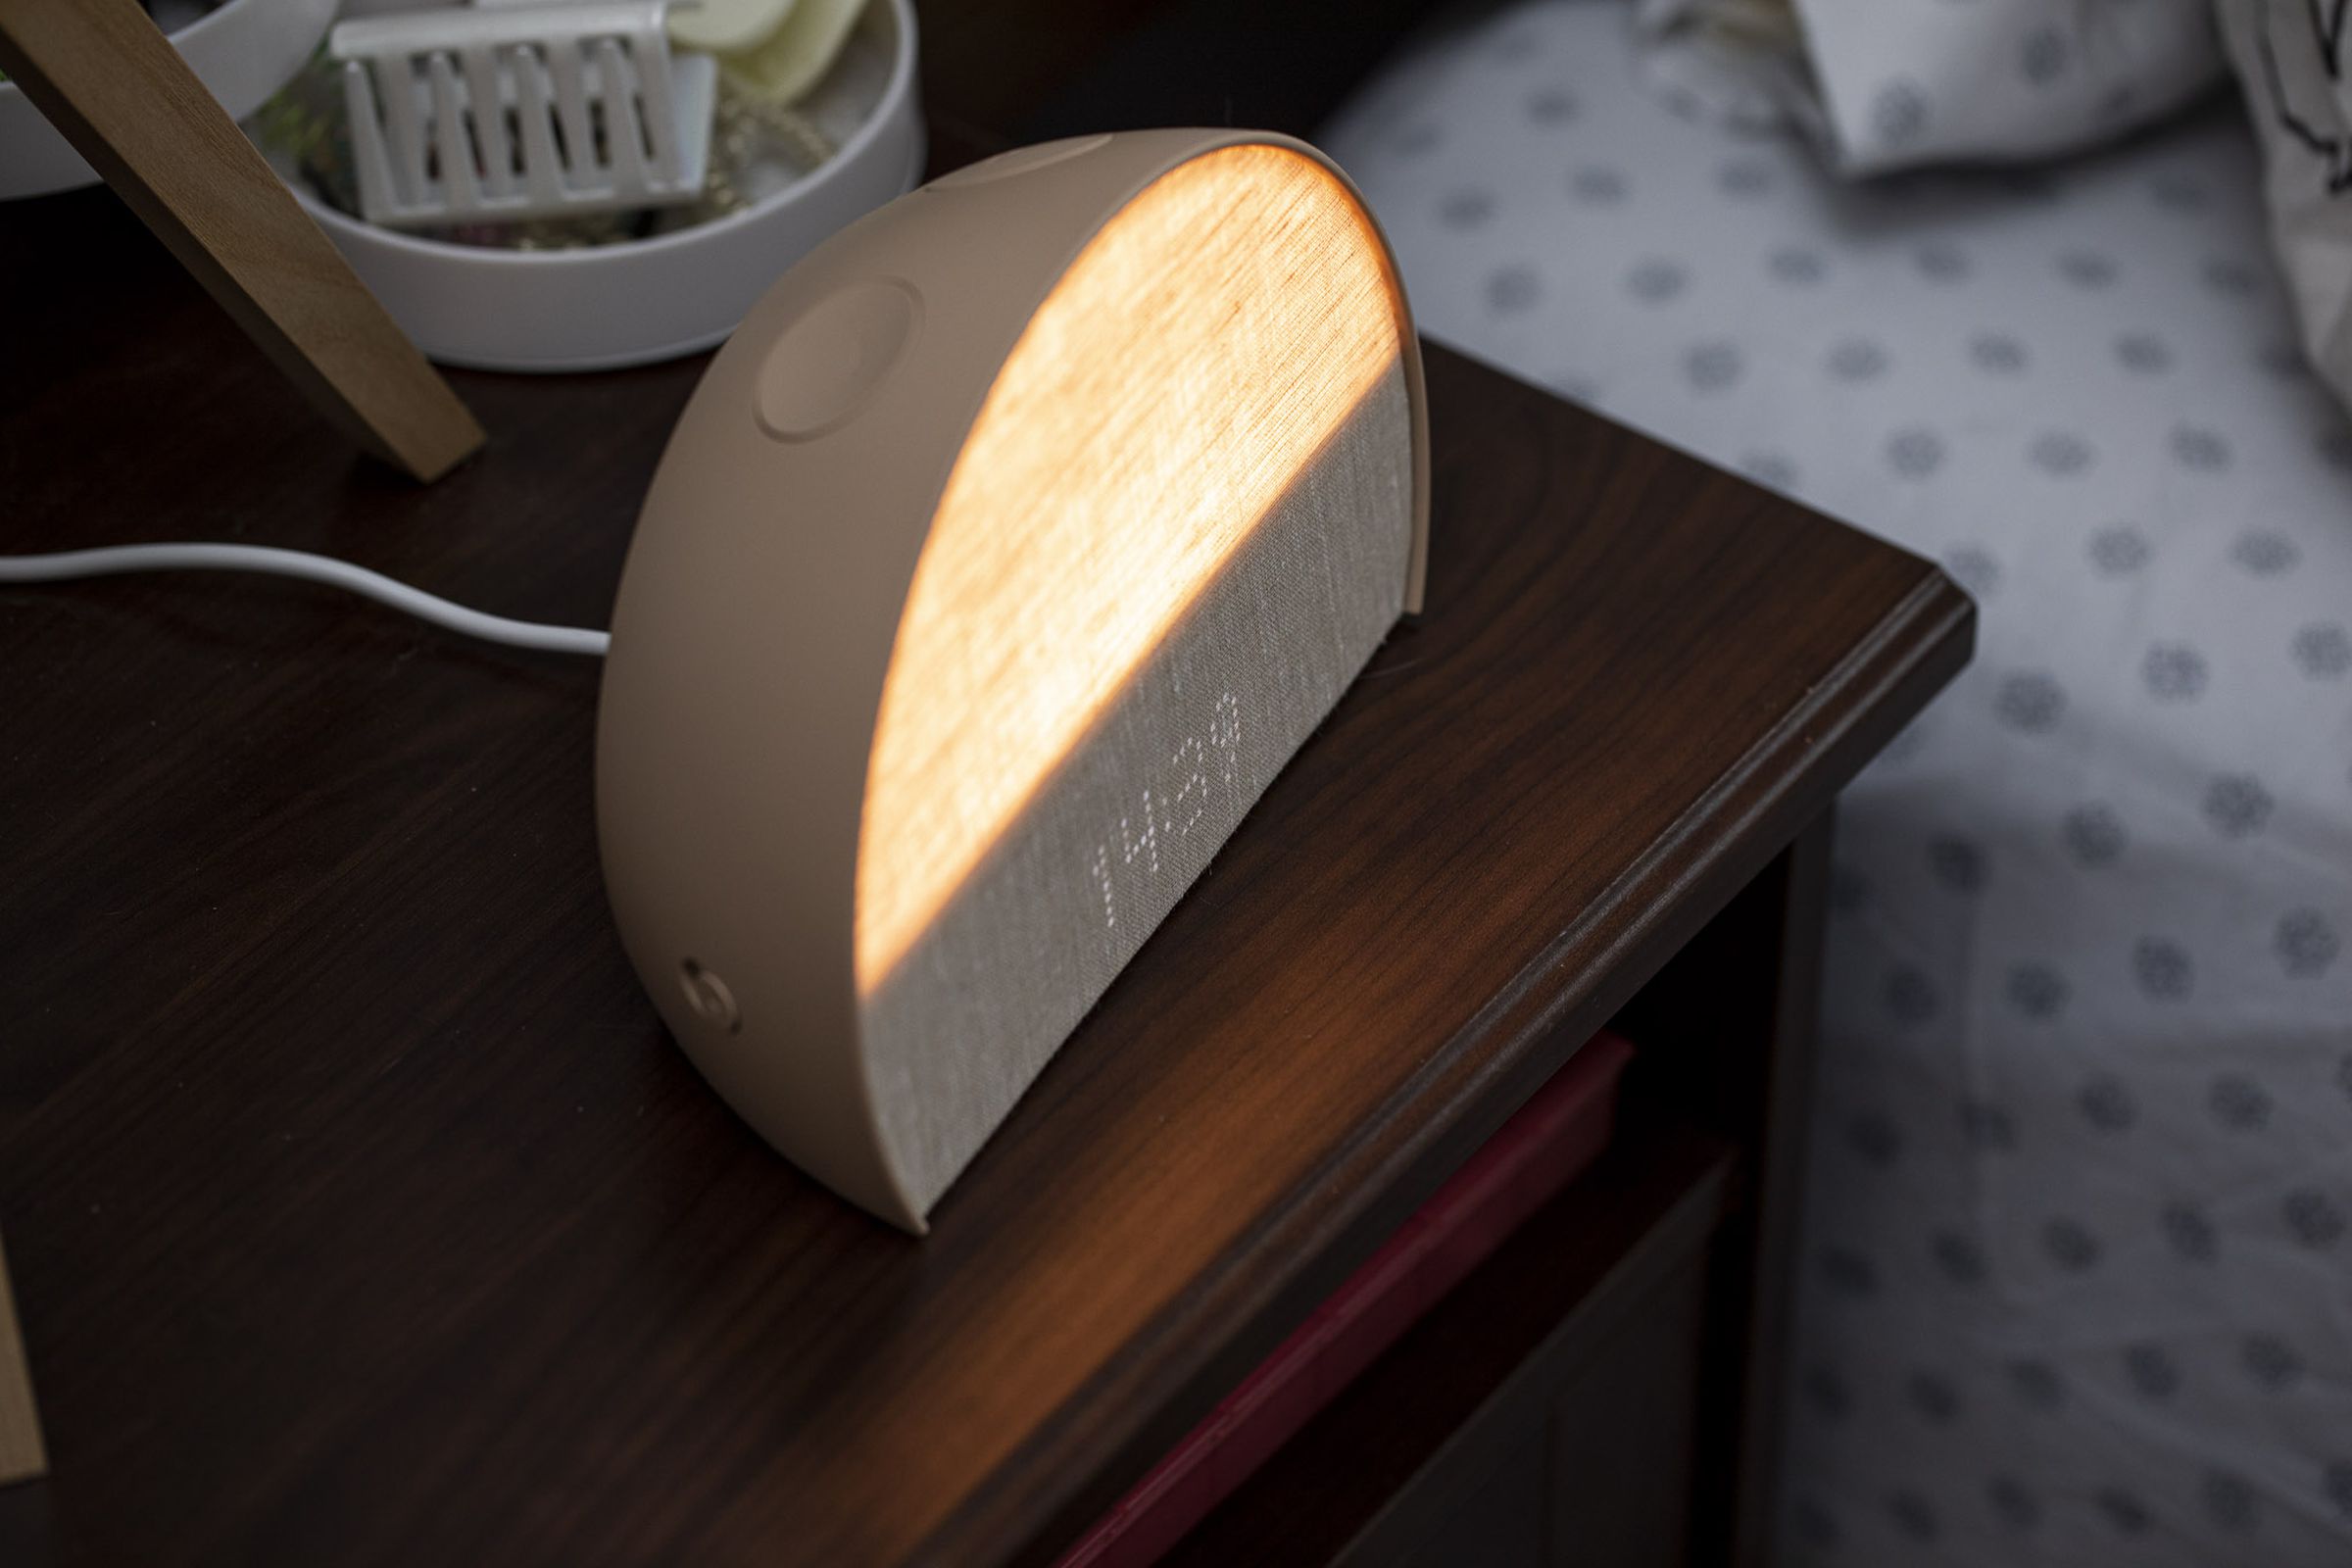 Angled view of the Hatch Restore 2 lit up on a nightstand